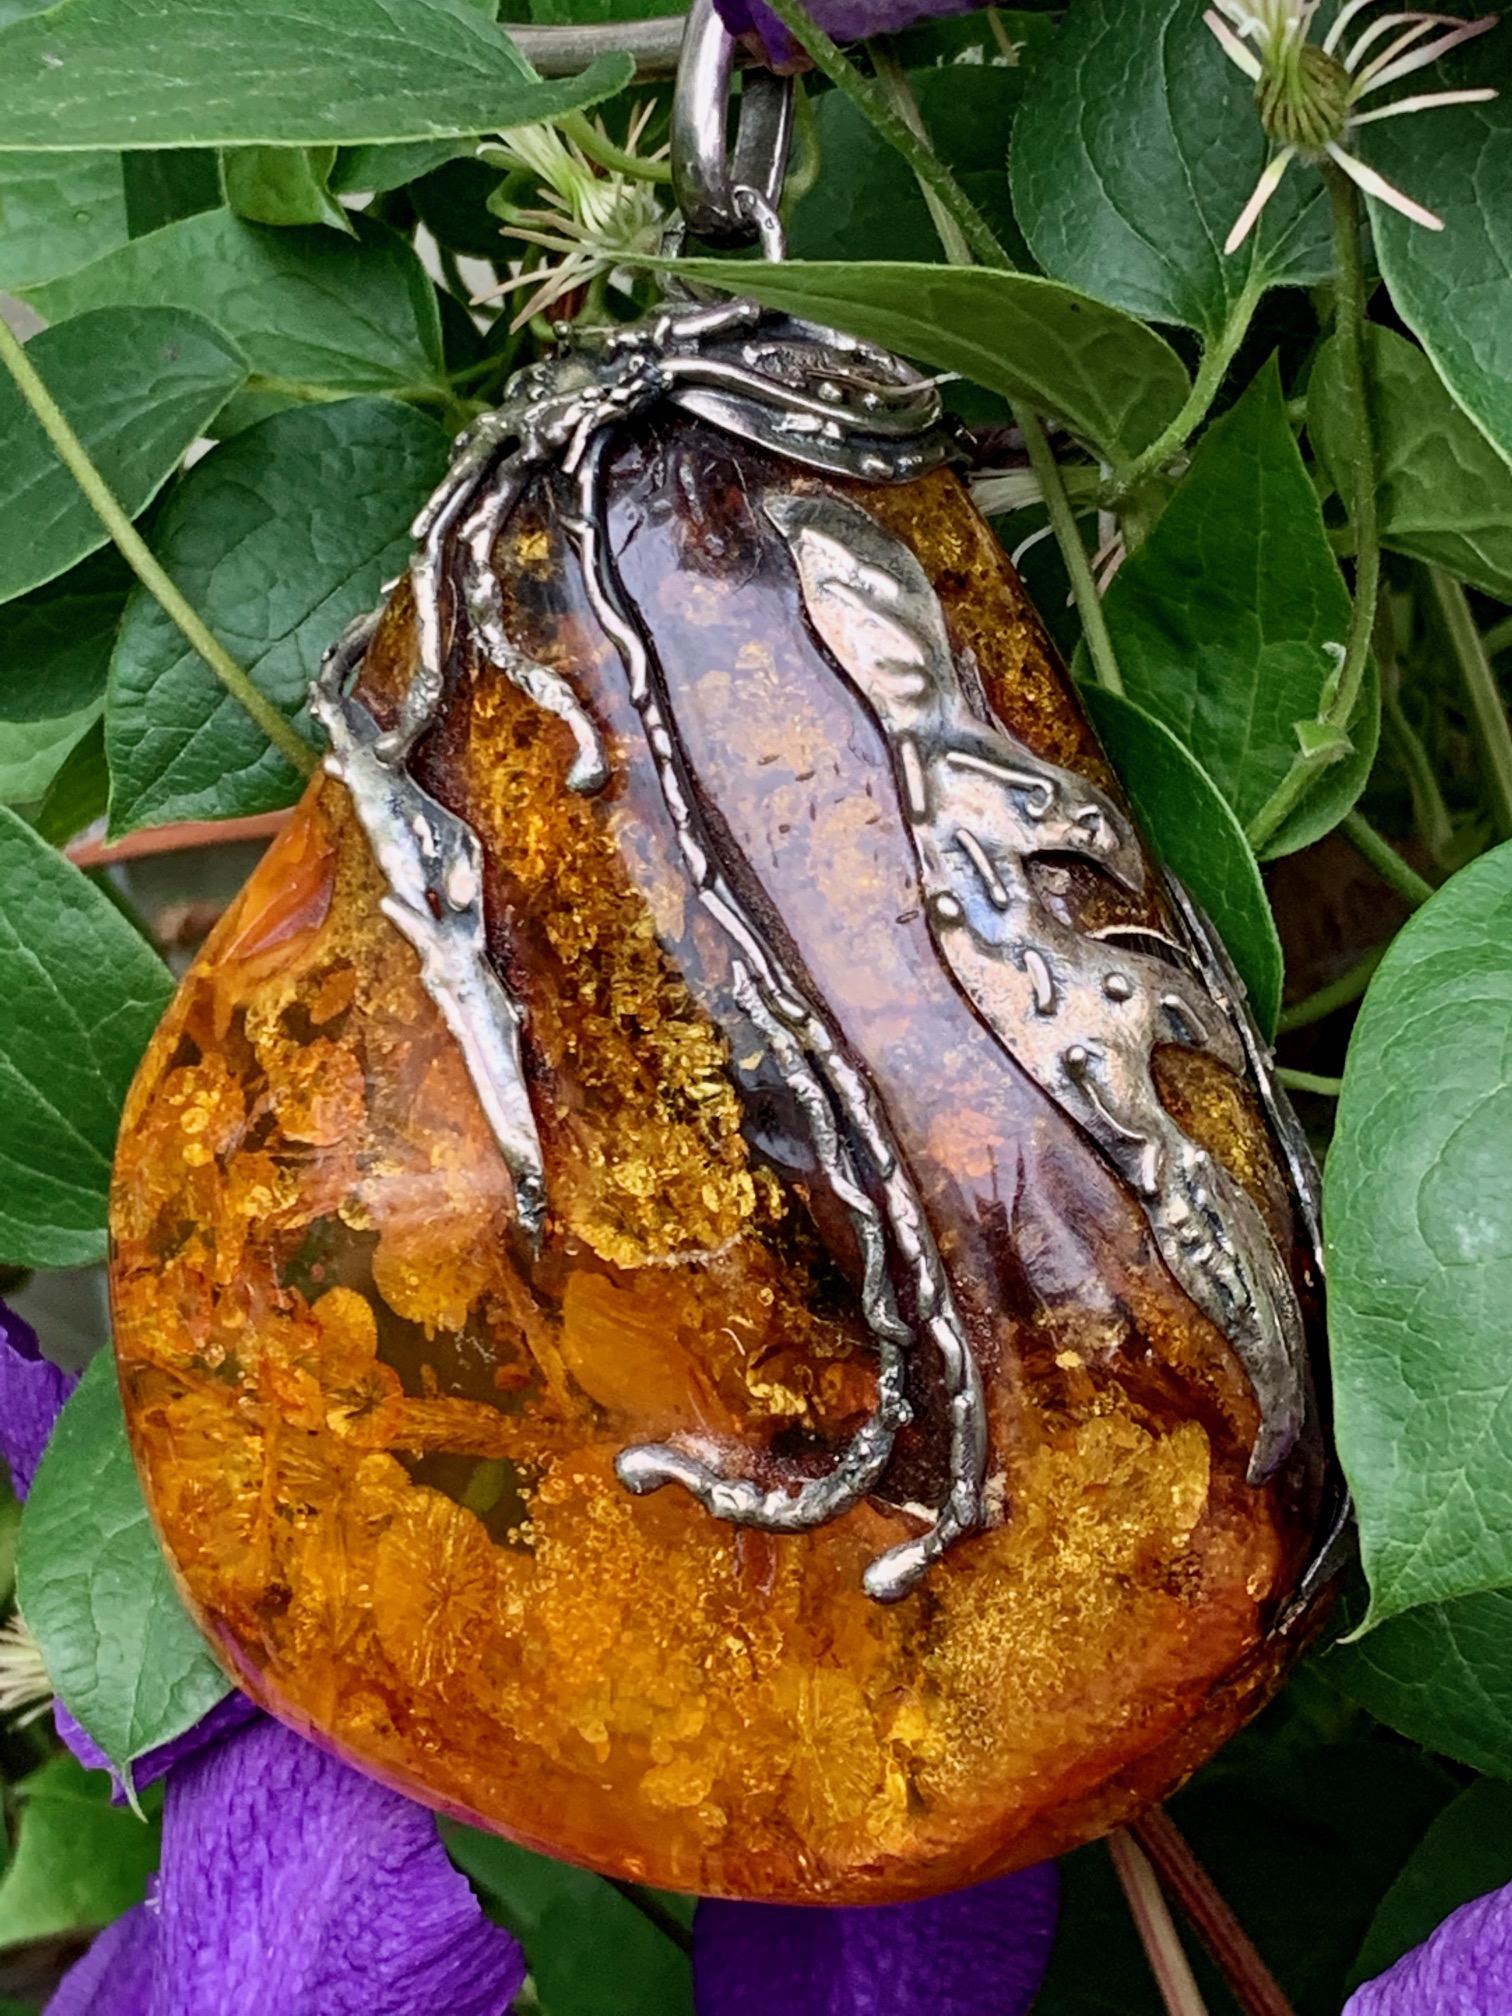 This HUGE vintage Baltic Amber drop-shaped pendant with artistic applied Silver on a Sterling Silver choker style necklace is absolutely stunning, breathtaking, show-stopping; it's simply amazing!  

It is stamped with European hallmarks near its